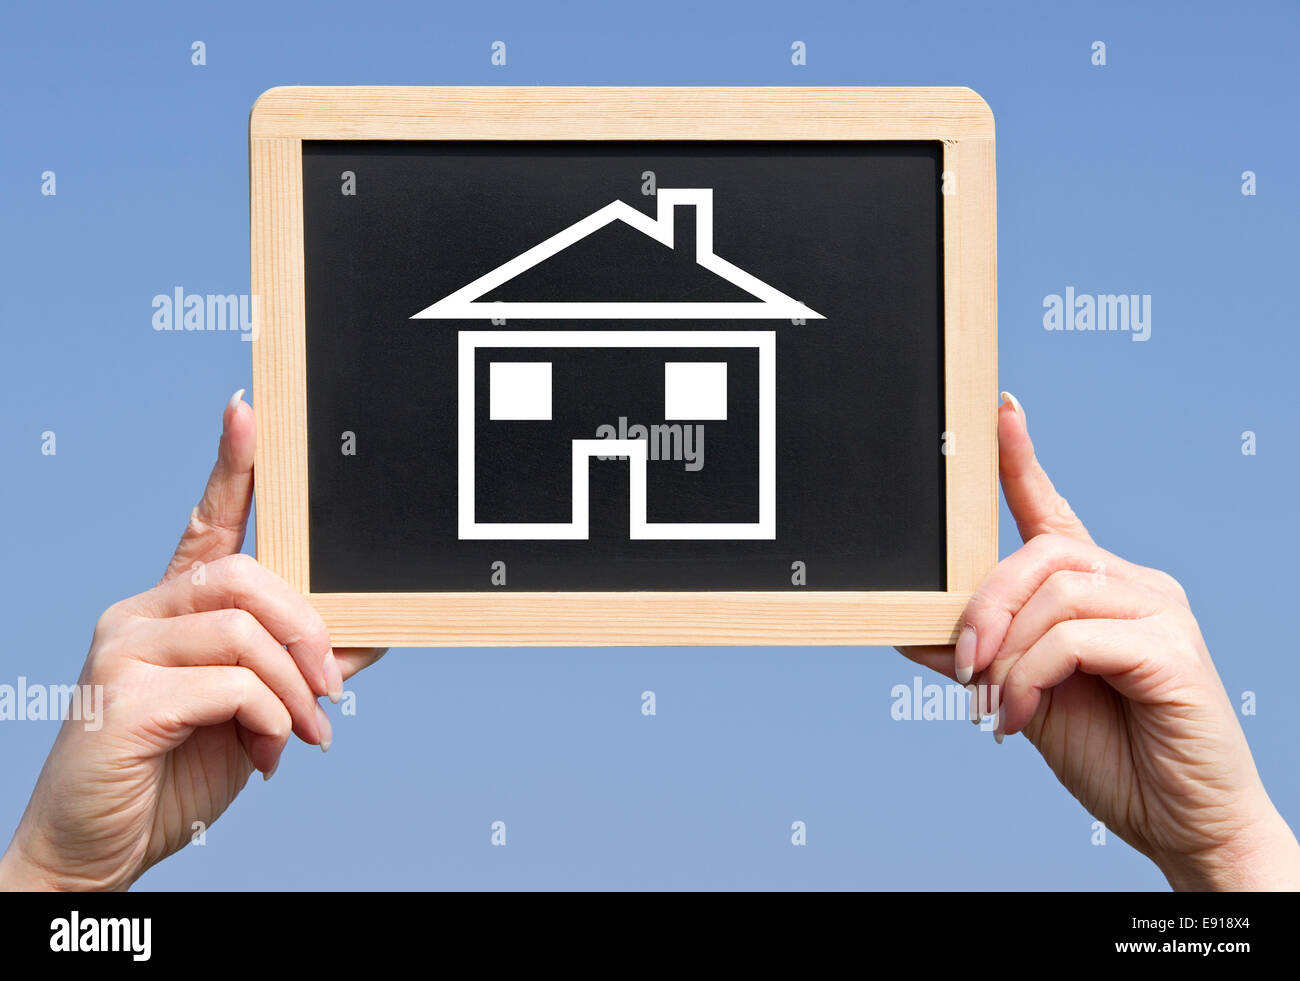 My new Home - Concept Stock Photo